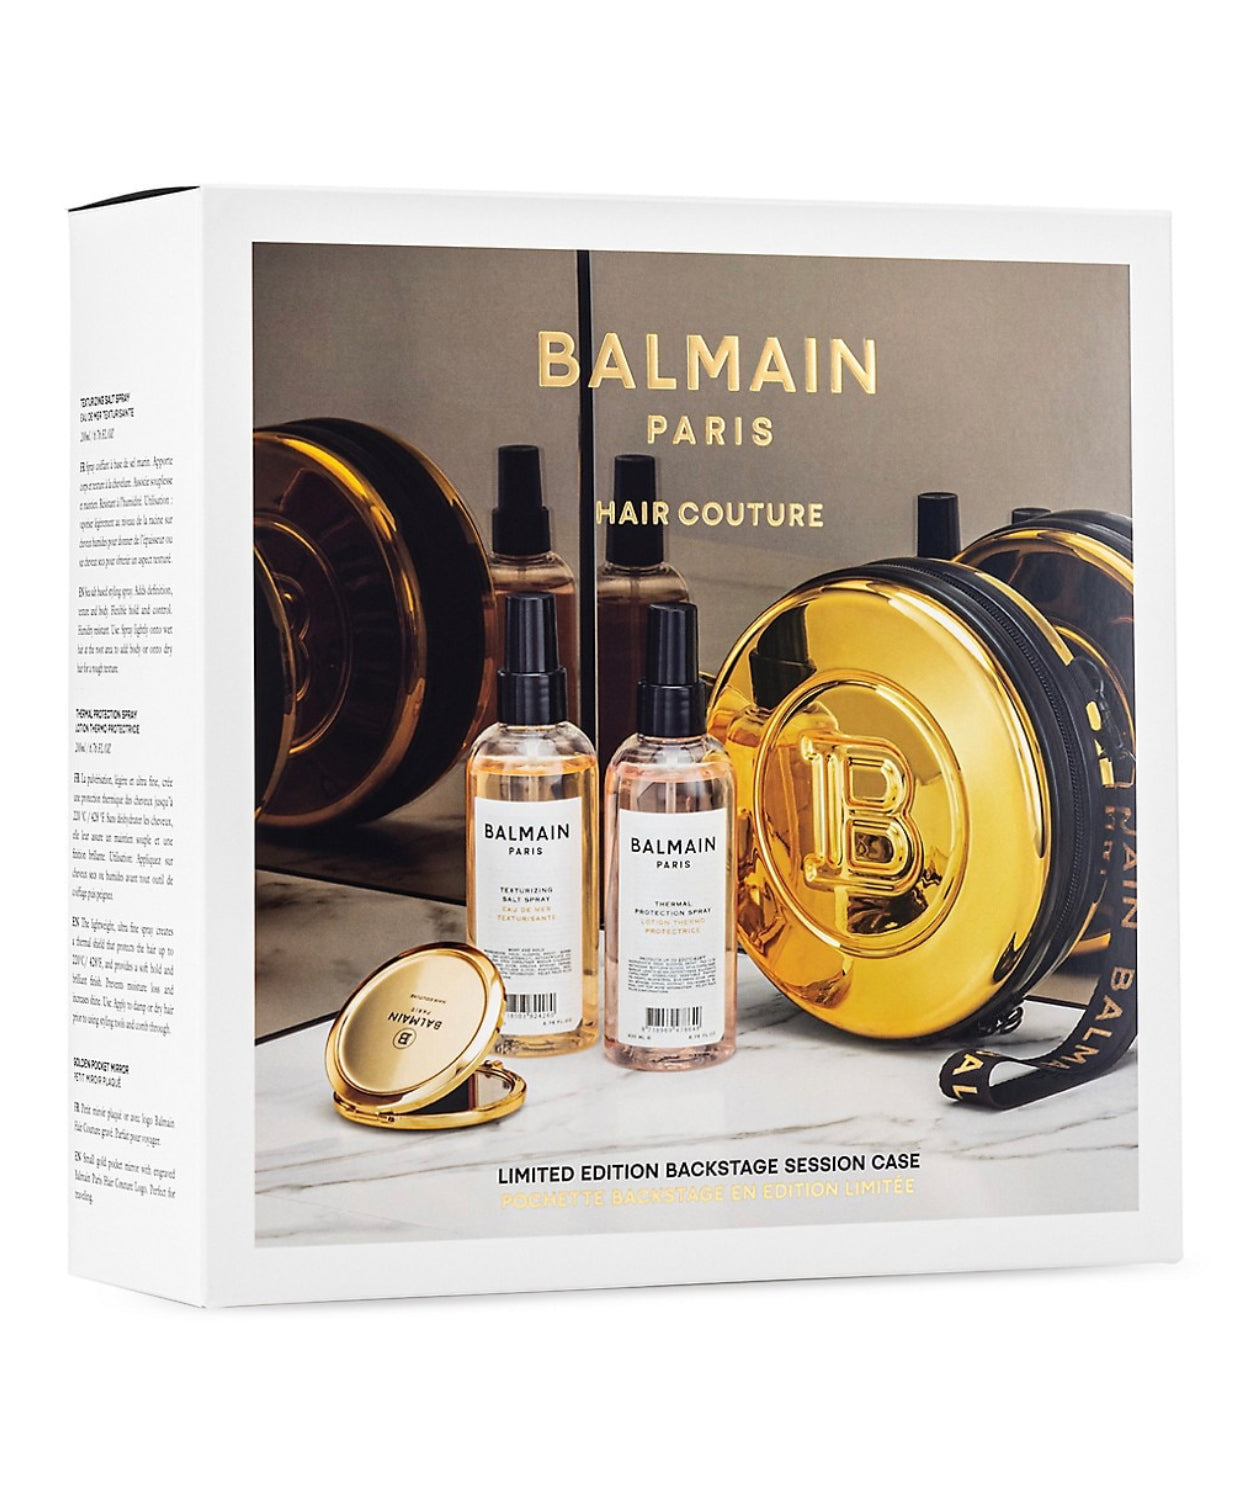 BALMAIN HAIR COUTURE, FALL/WINTER 2021 LIMITED EDITION COLLECTION POUCH SET